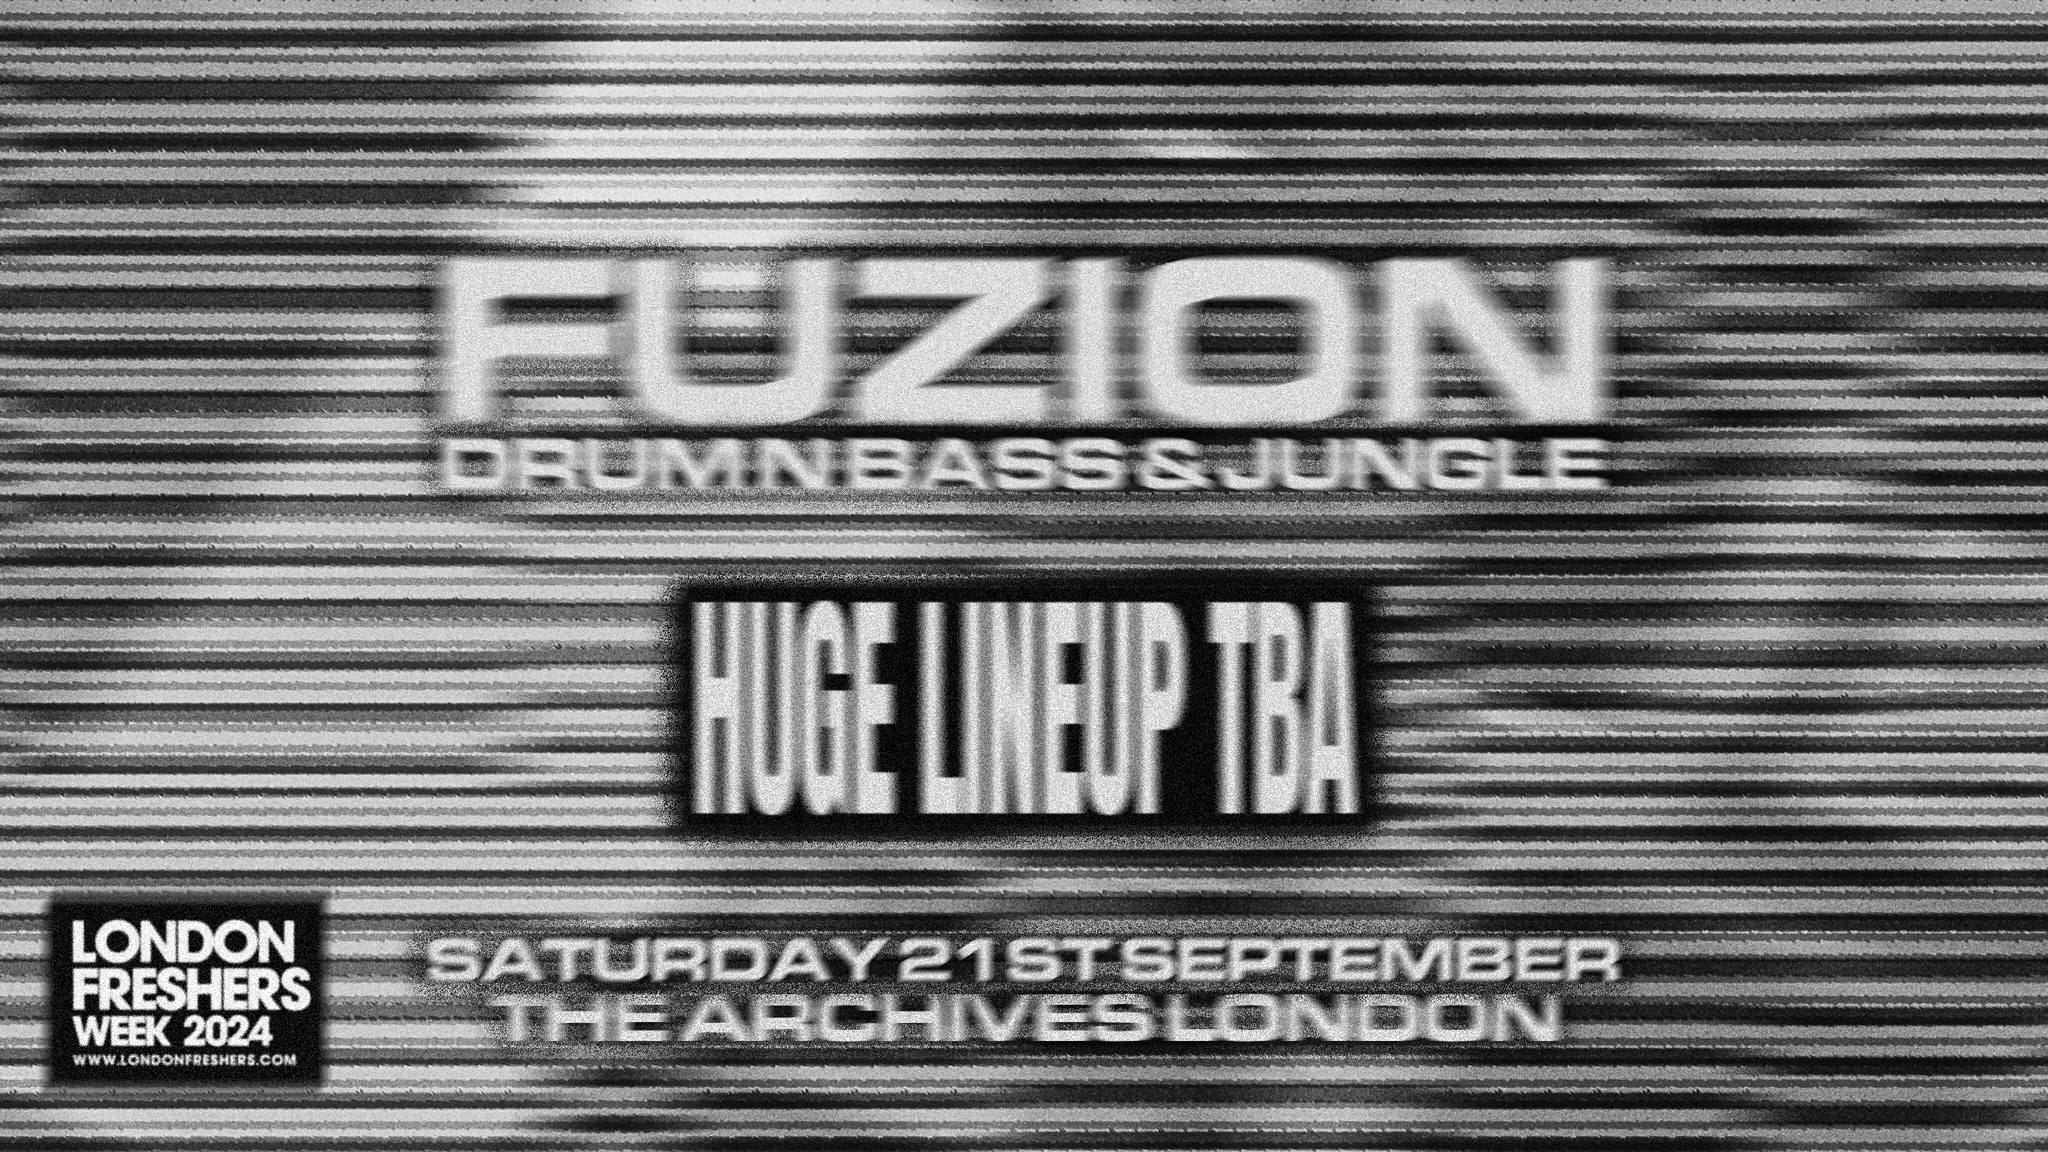 Fuzion – Drum n Bass & Jungle at The Archives | London Freshers Week 2024